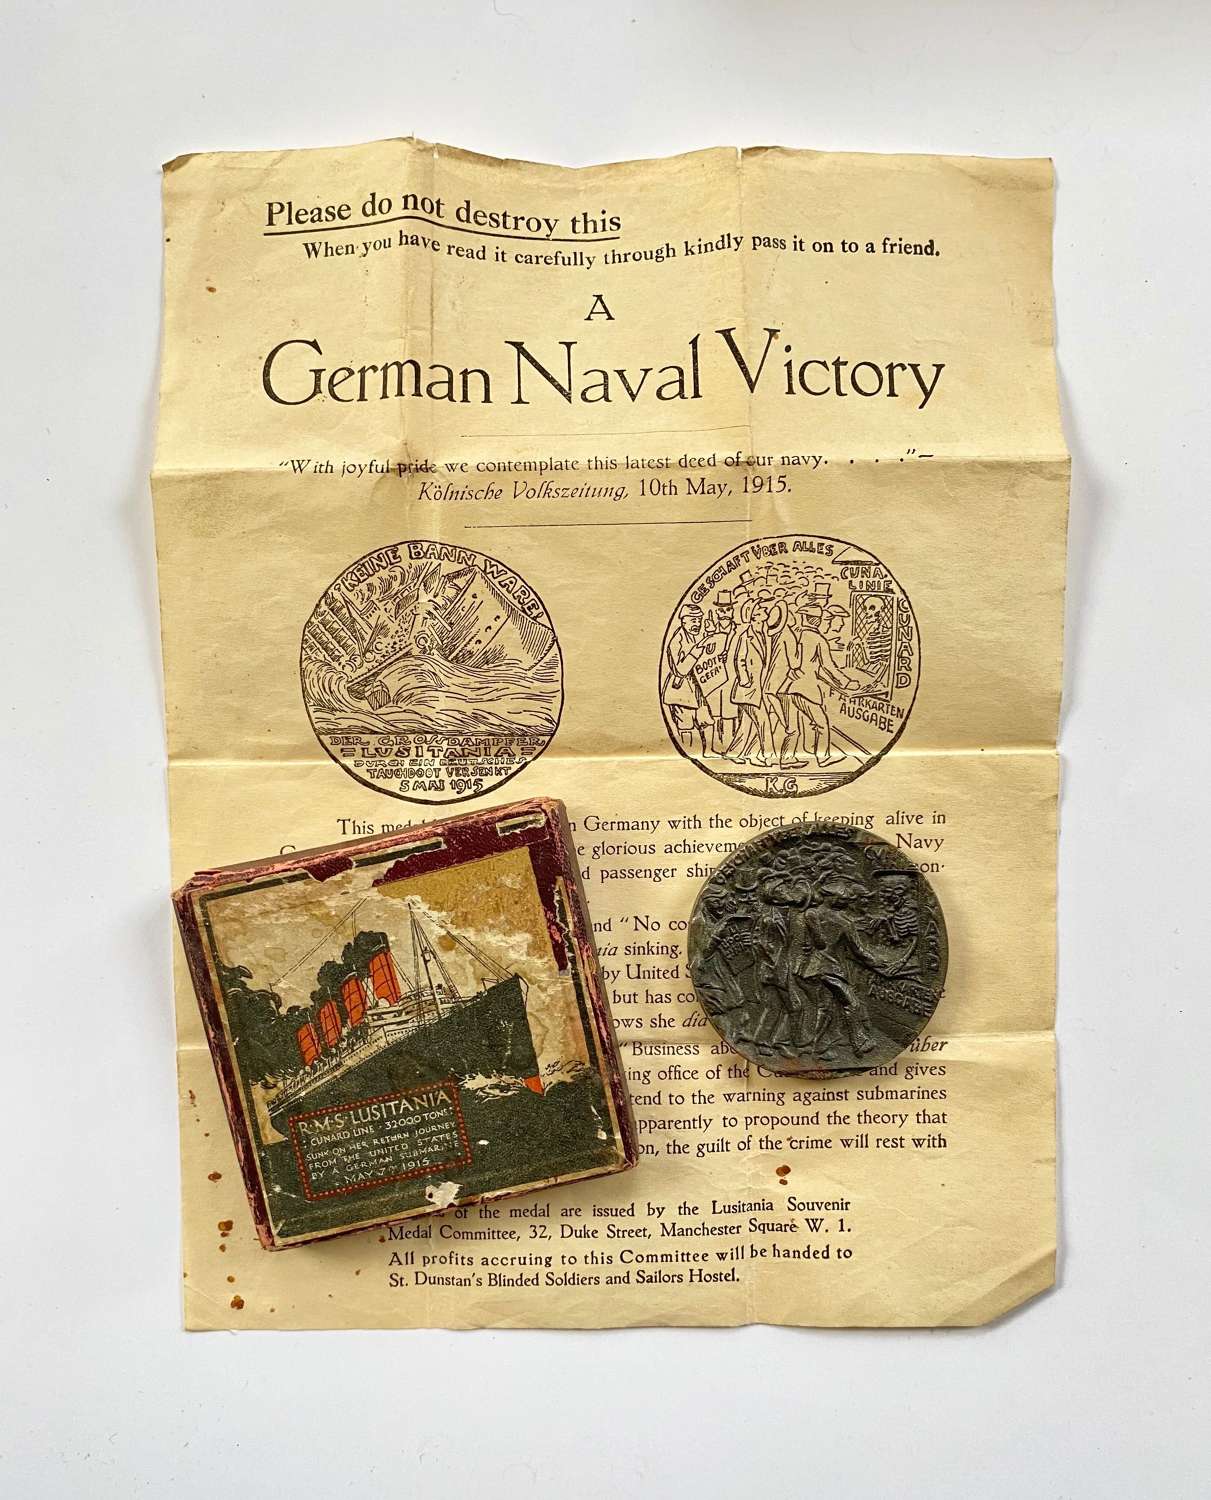 RMS Lusitania Cunard Line commemorative medal case and certificate